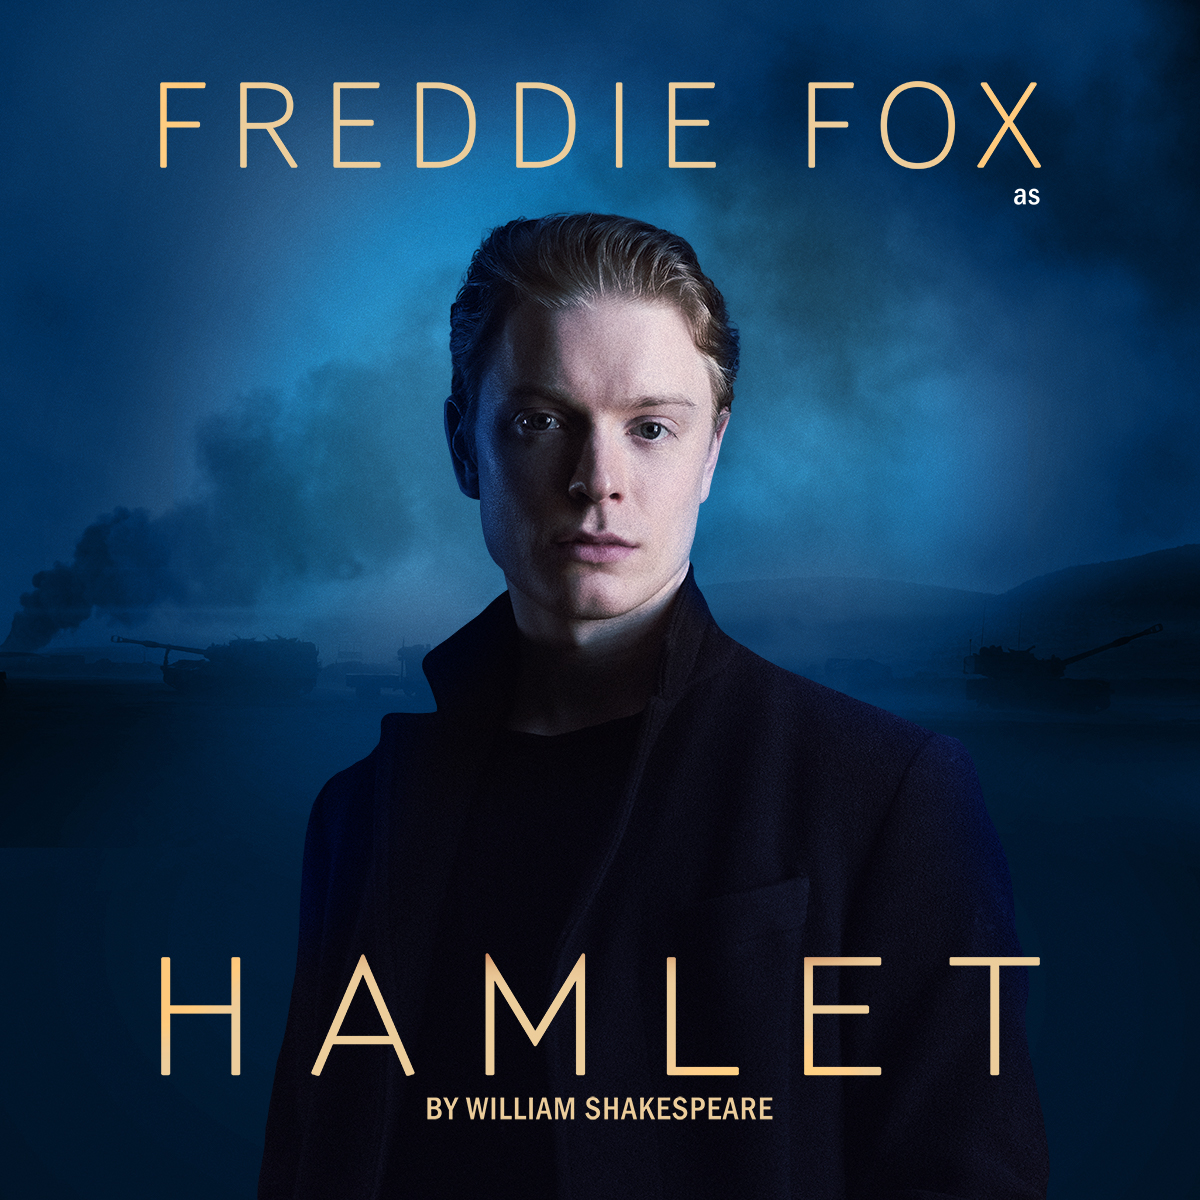 Poster for Hamlet, featuring a young man looking at the camera.